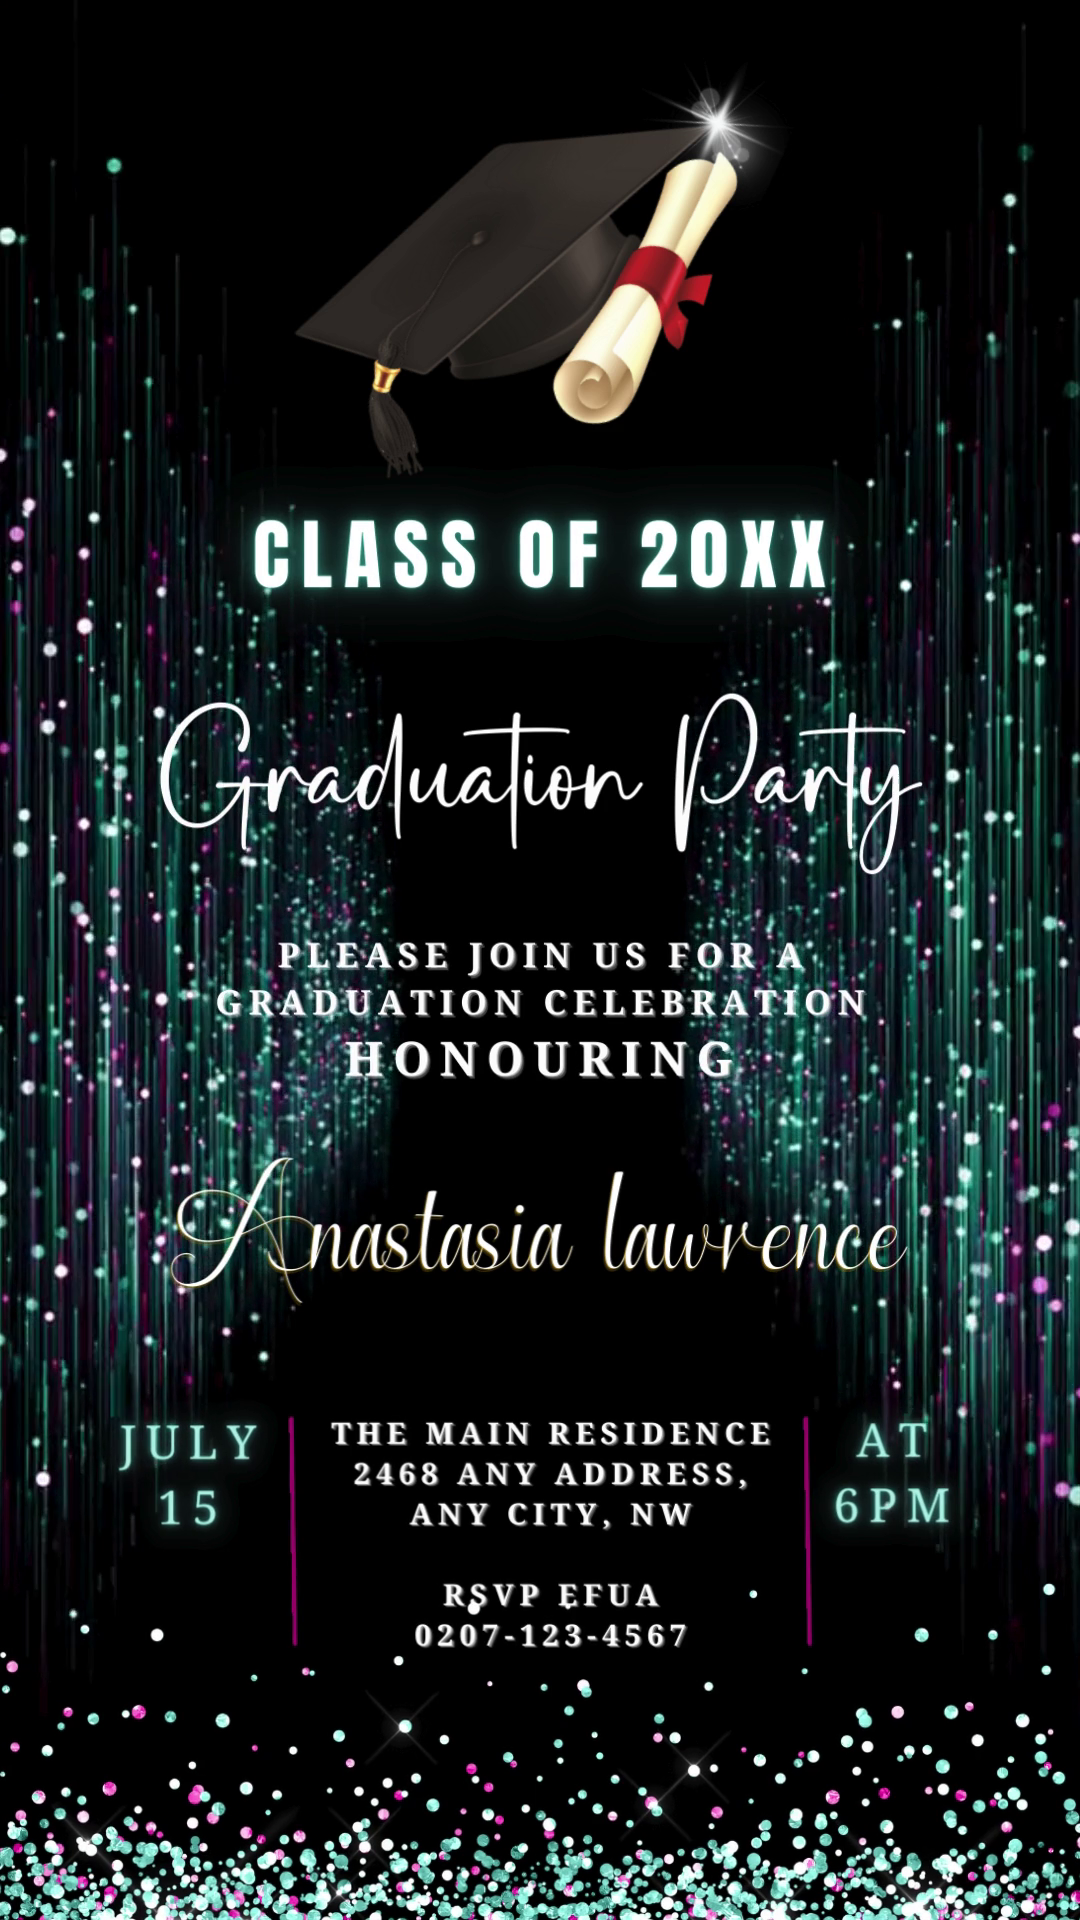 Graduation video invitation with white text on a black background, featuring purple and green lights, a diploma, and a graduation cap.